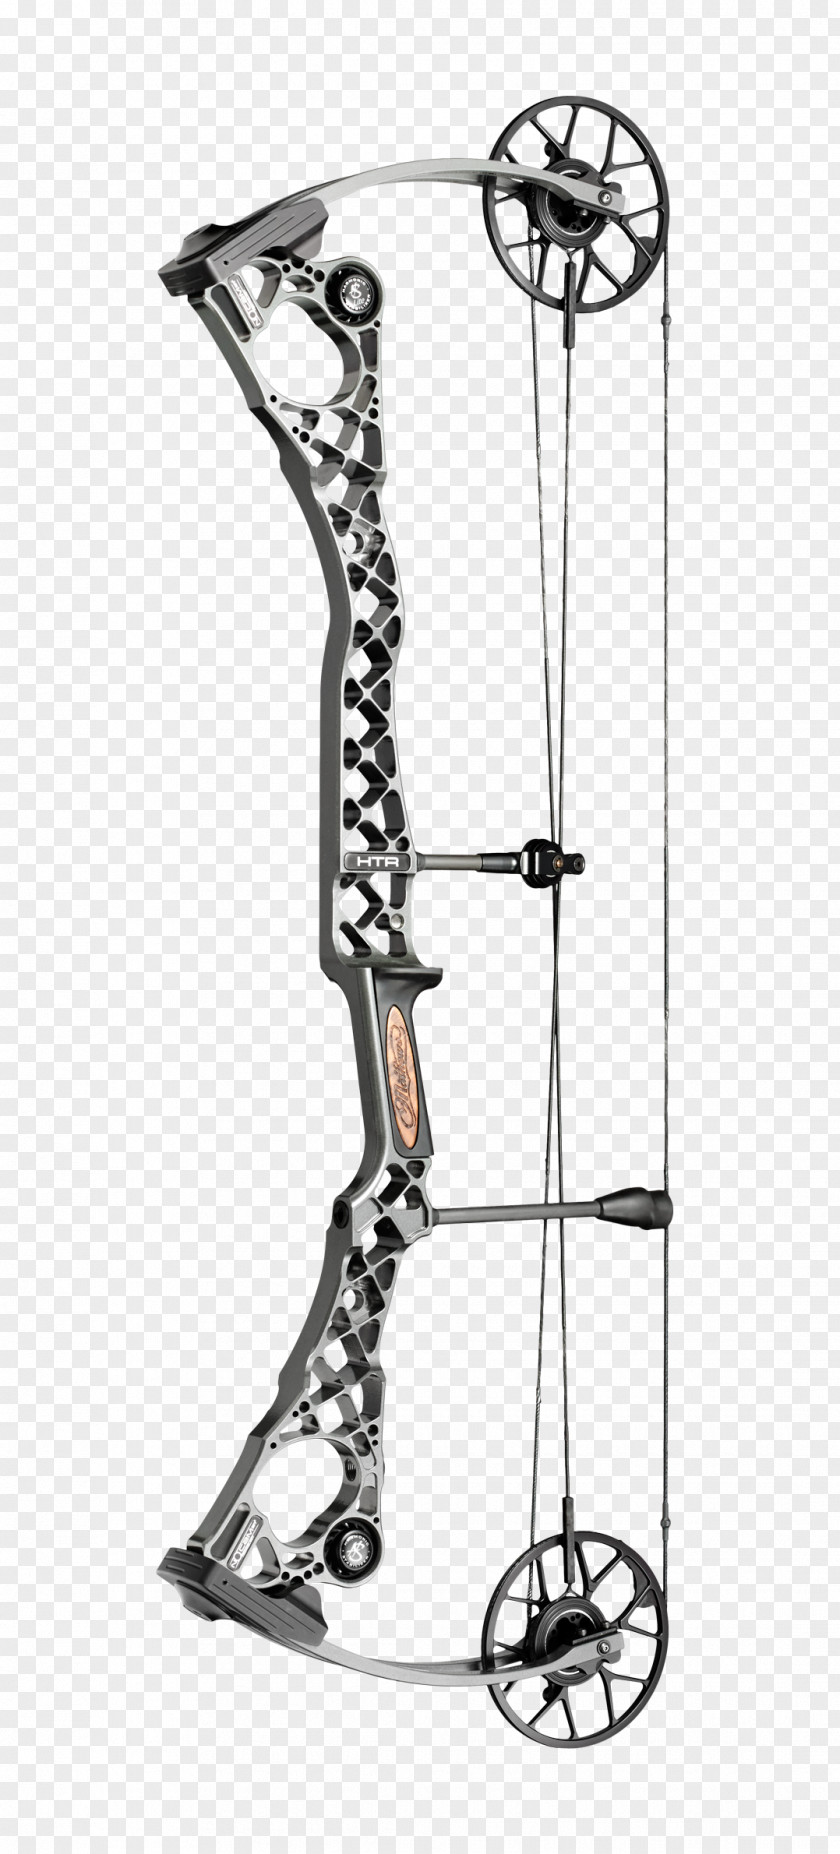 Archery Mathews Archery, Inc. Bowhunting Cam Compound Bows PNG